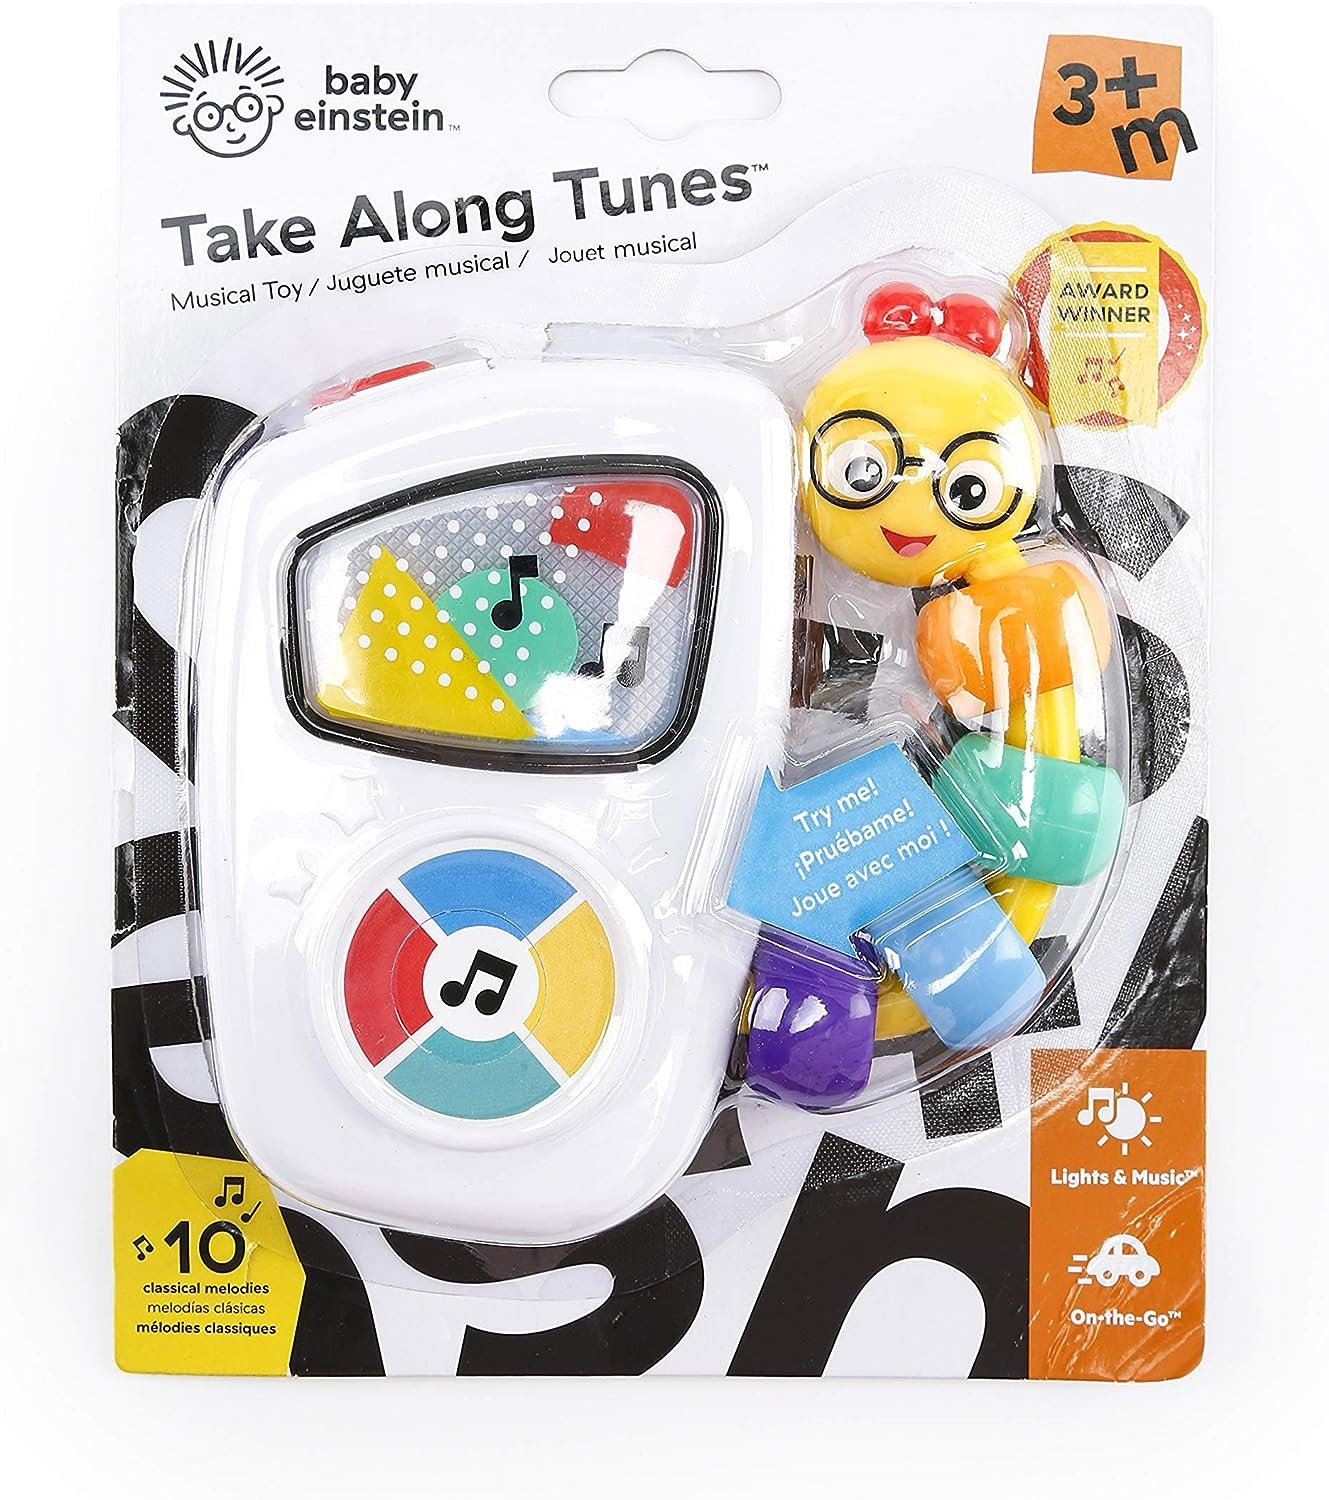 Baby Einstein Take Along Tunes Musical Toy Review